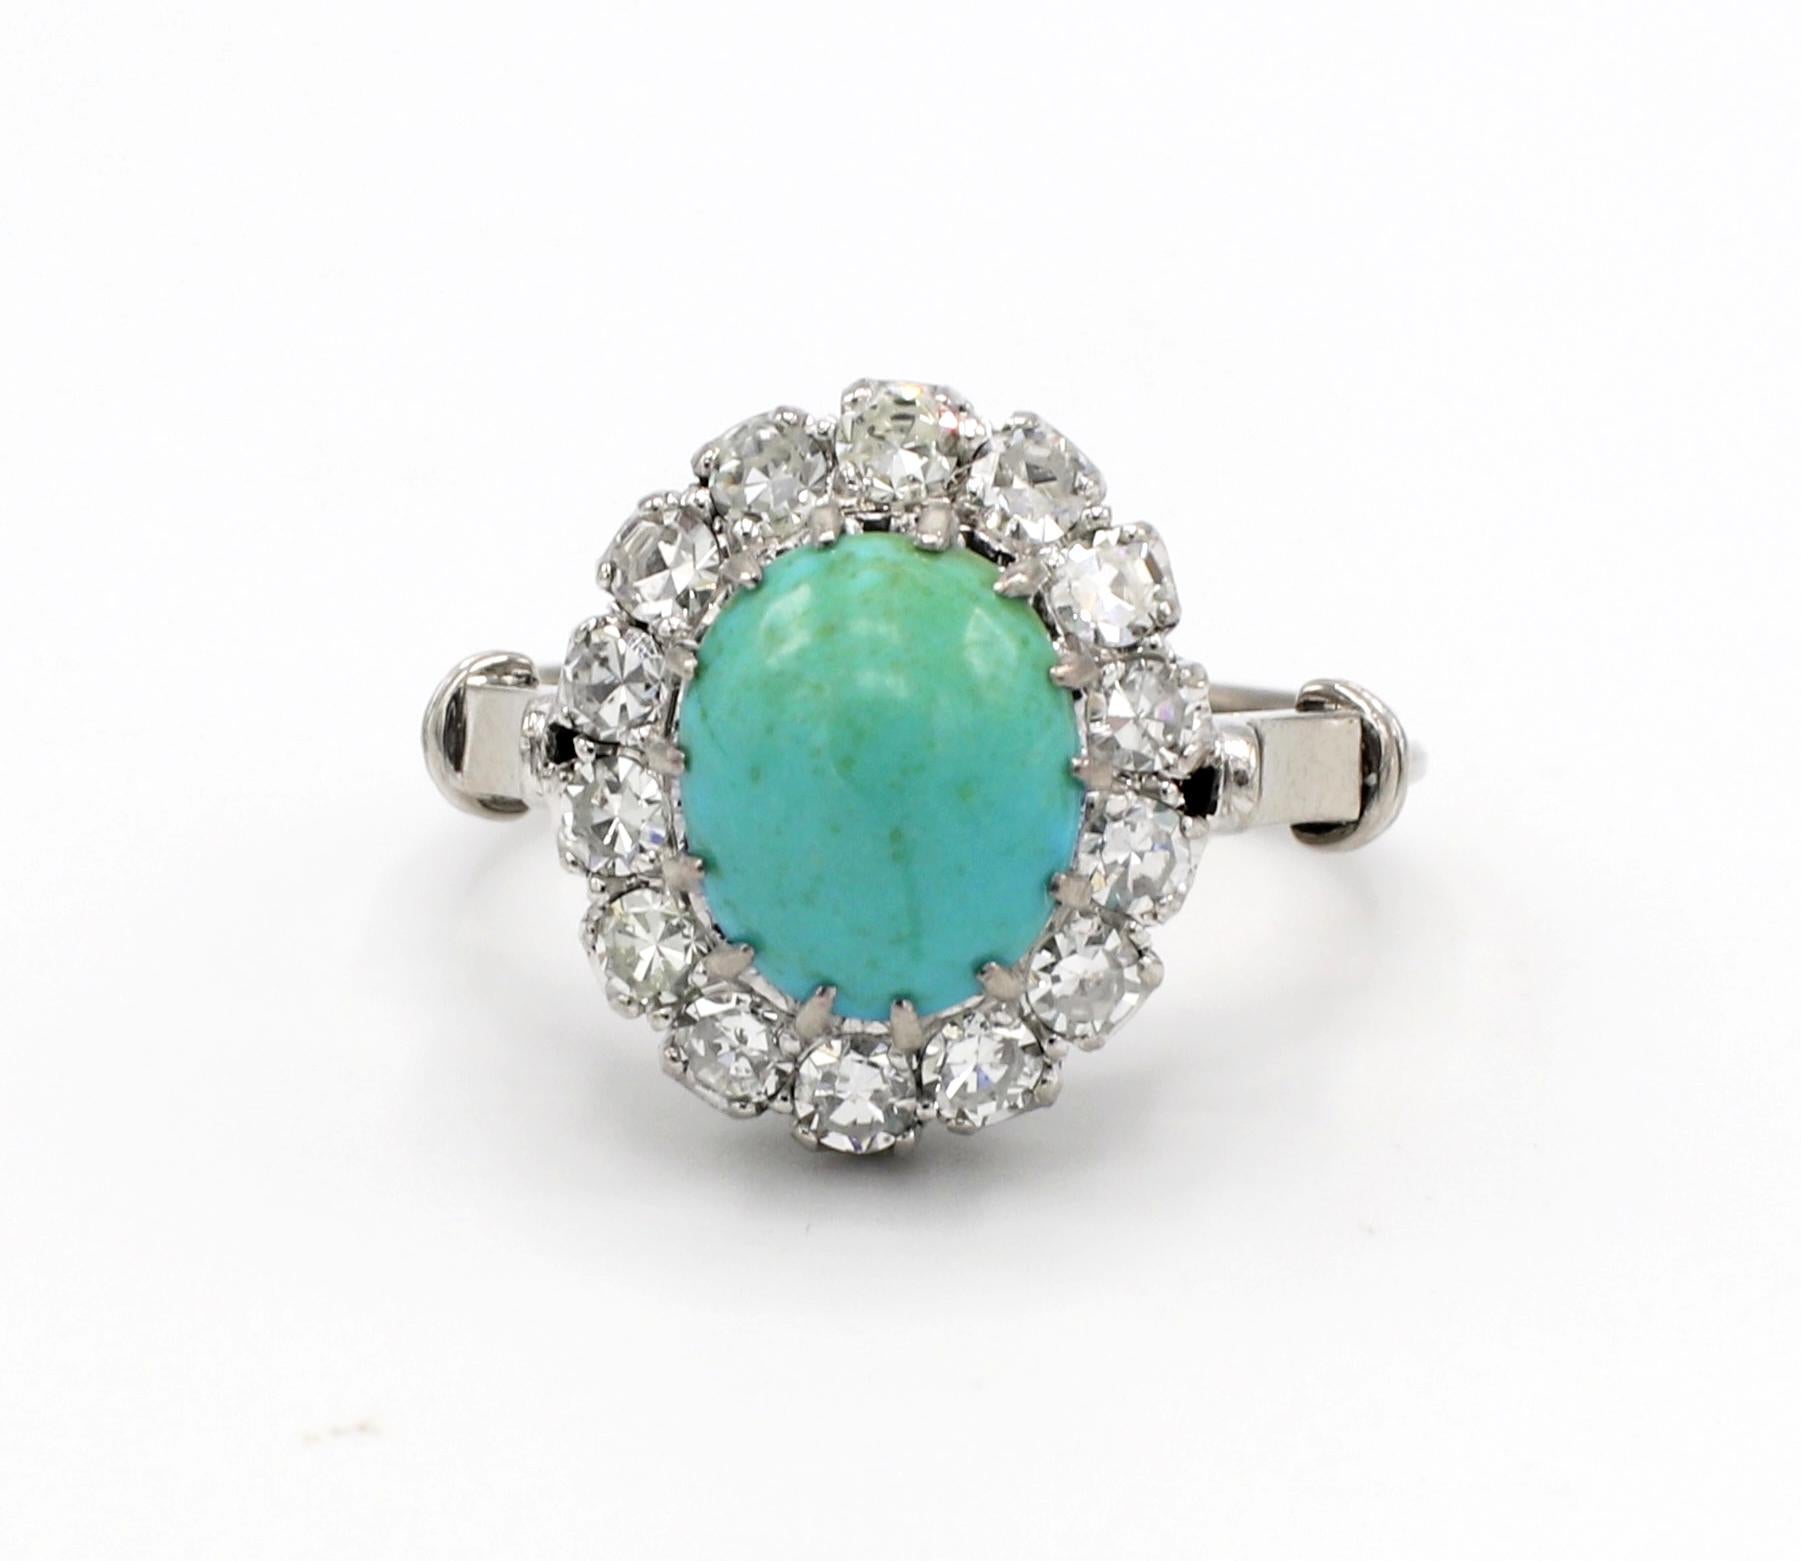 Cabochon 18 Karat White Gold Diamond and Turquoise Halo Cocktail Ring